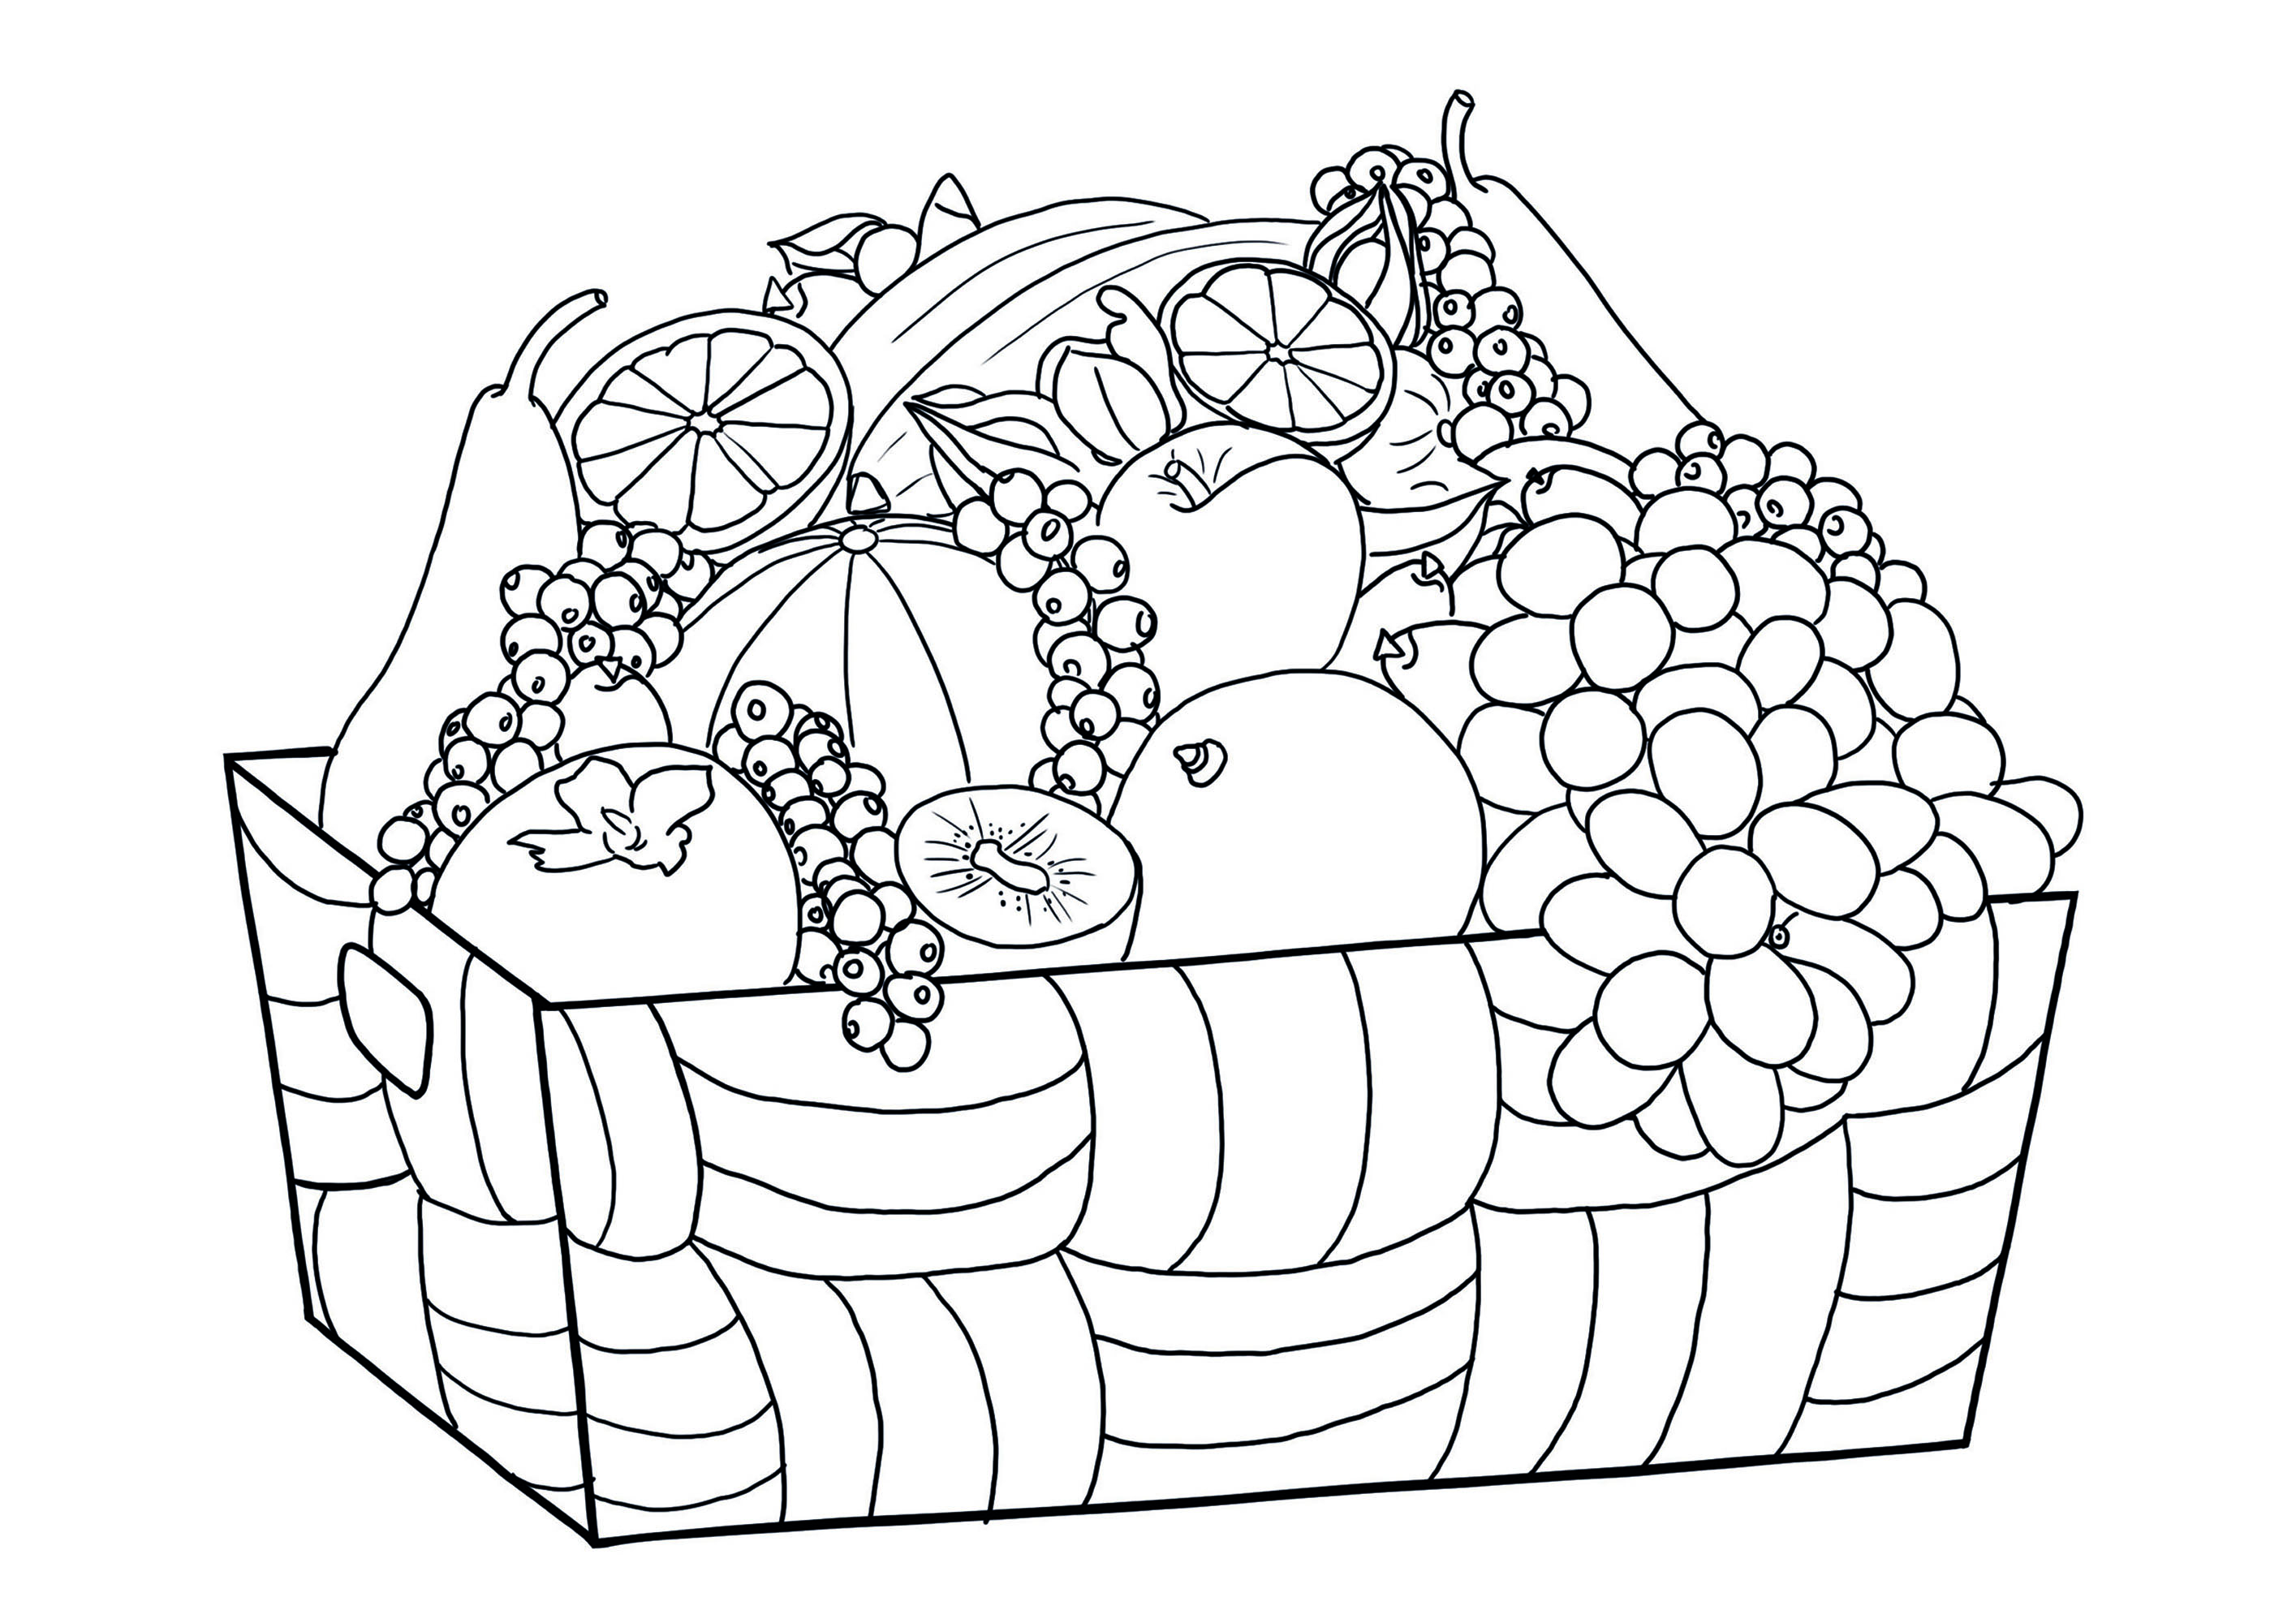 Fruits and Vegetables Coloring Page